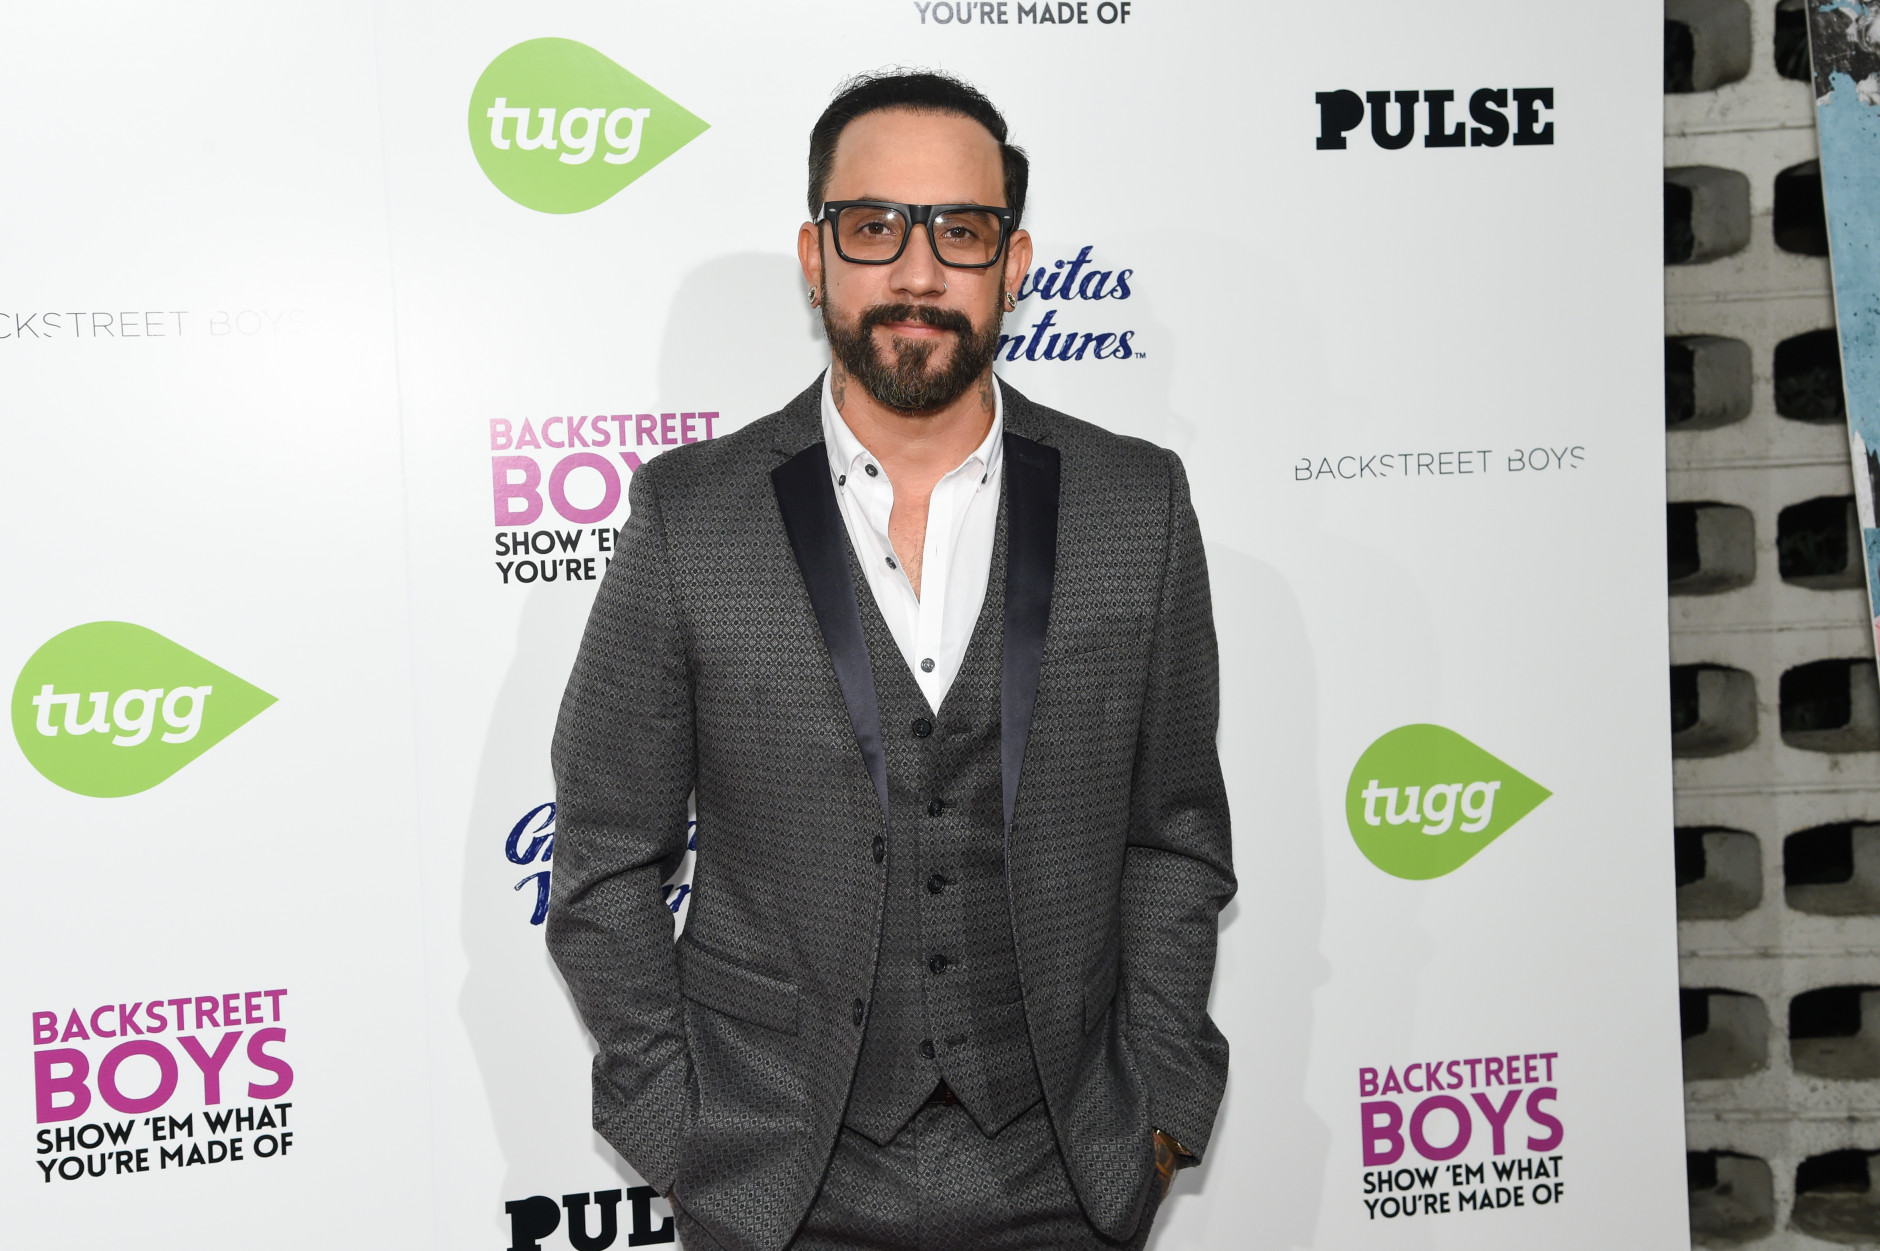 A.J. McLean arrives at the Backstreet Boys: Show Em What Youre Made Of premiere at the Arclight Cinemas - Cinerama Dome on Thursday, Jan. 29, 2015, in Los Angeles. (Photo by Rob Latour/Invision/AP)